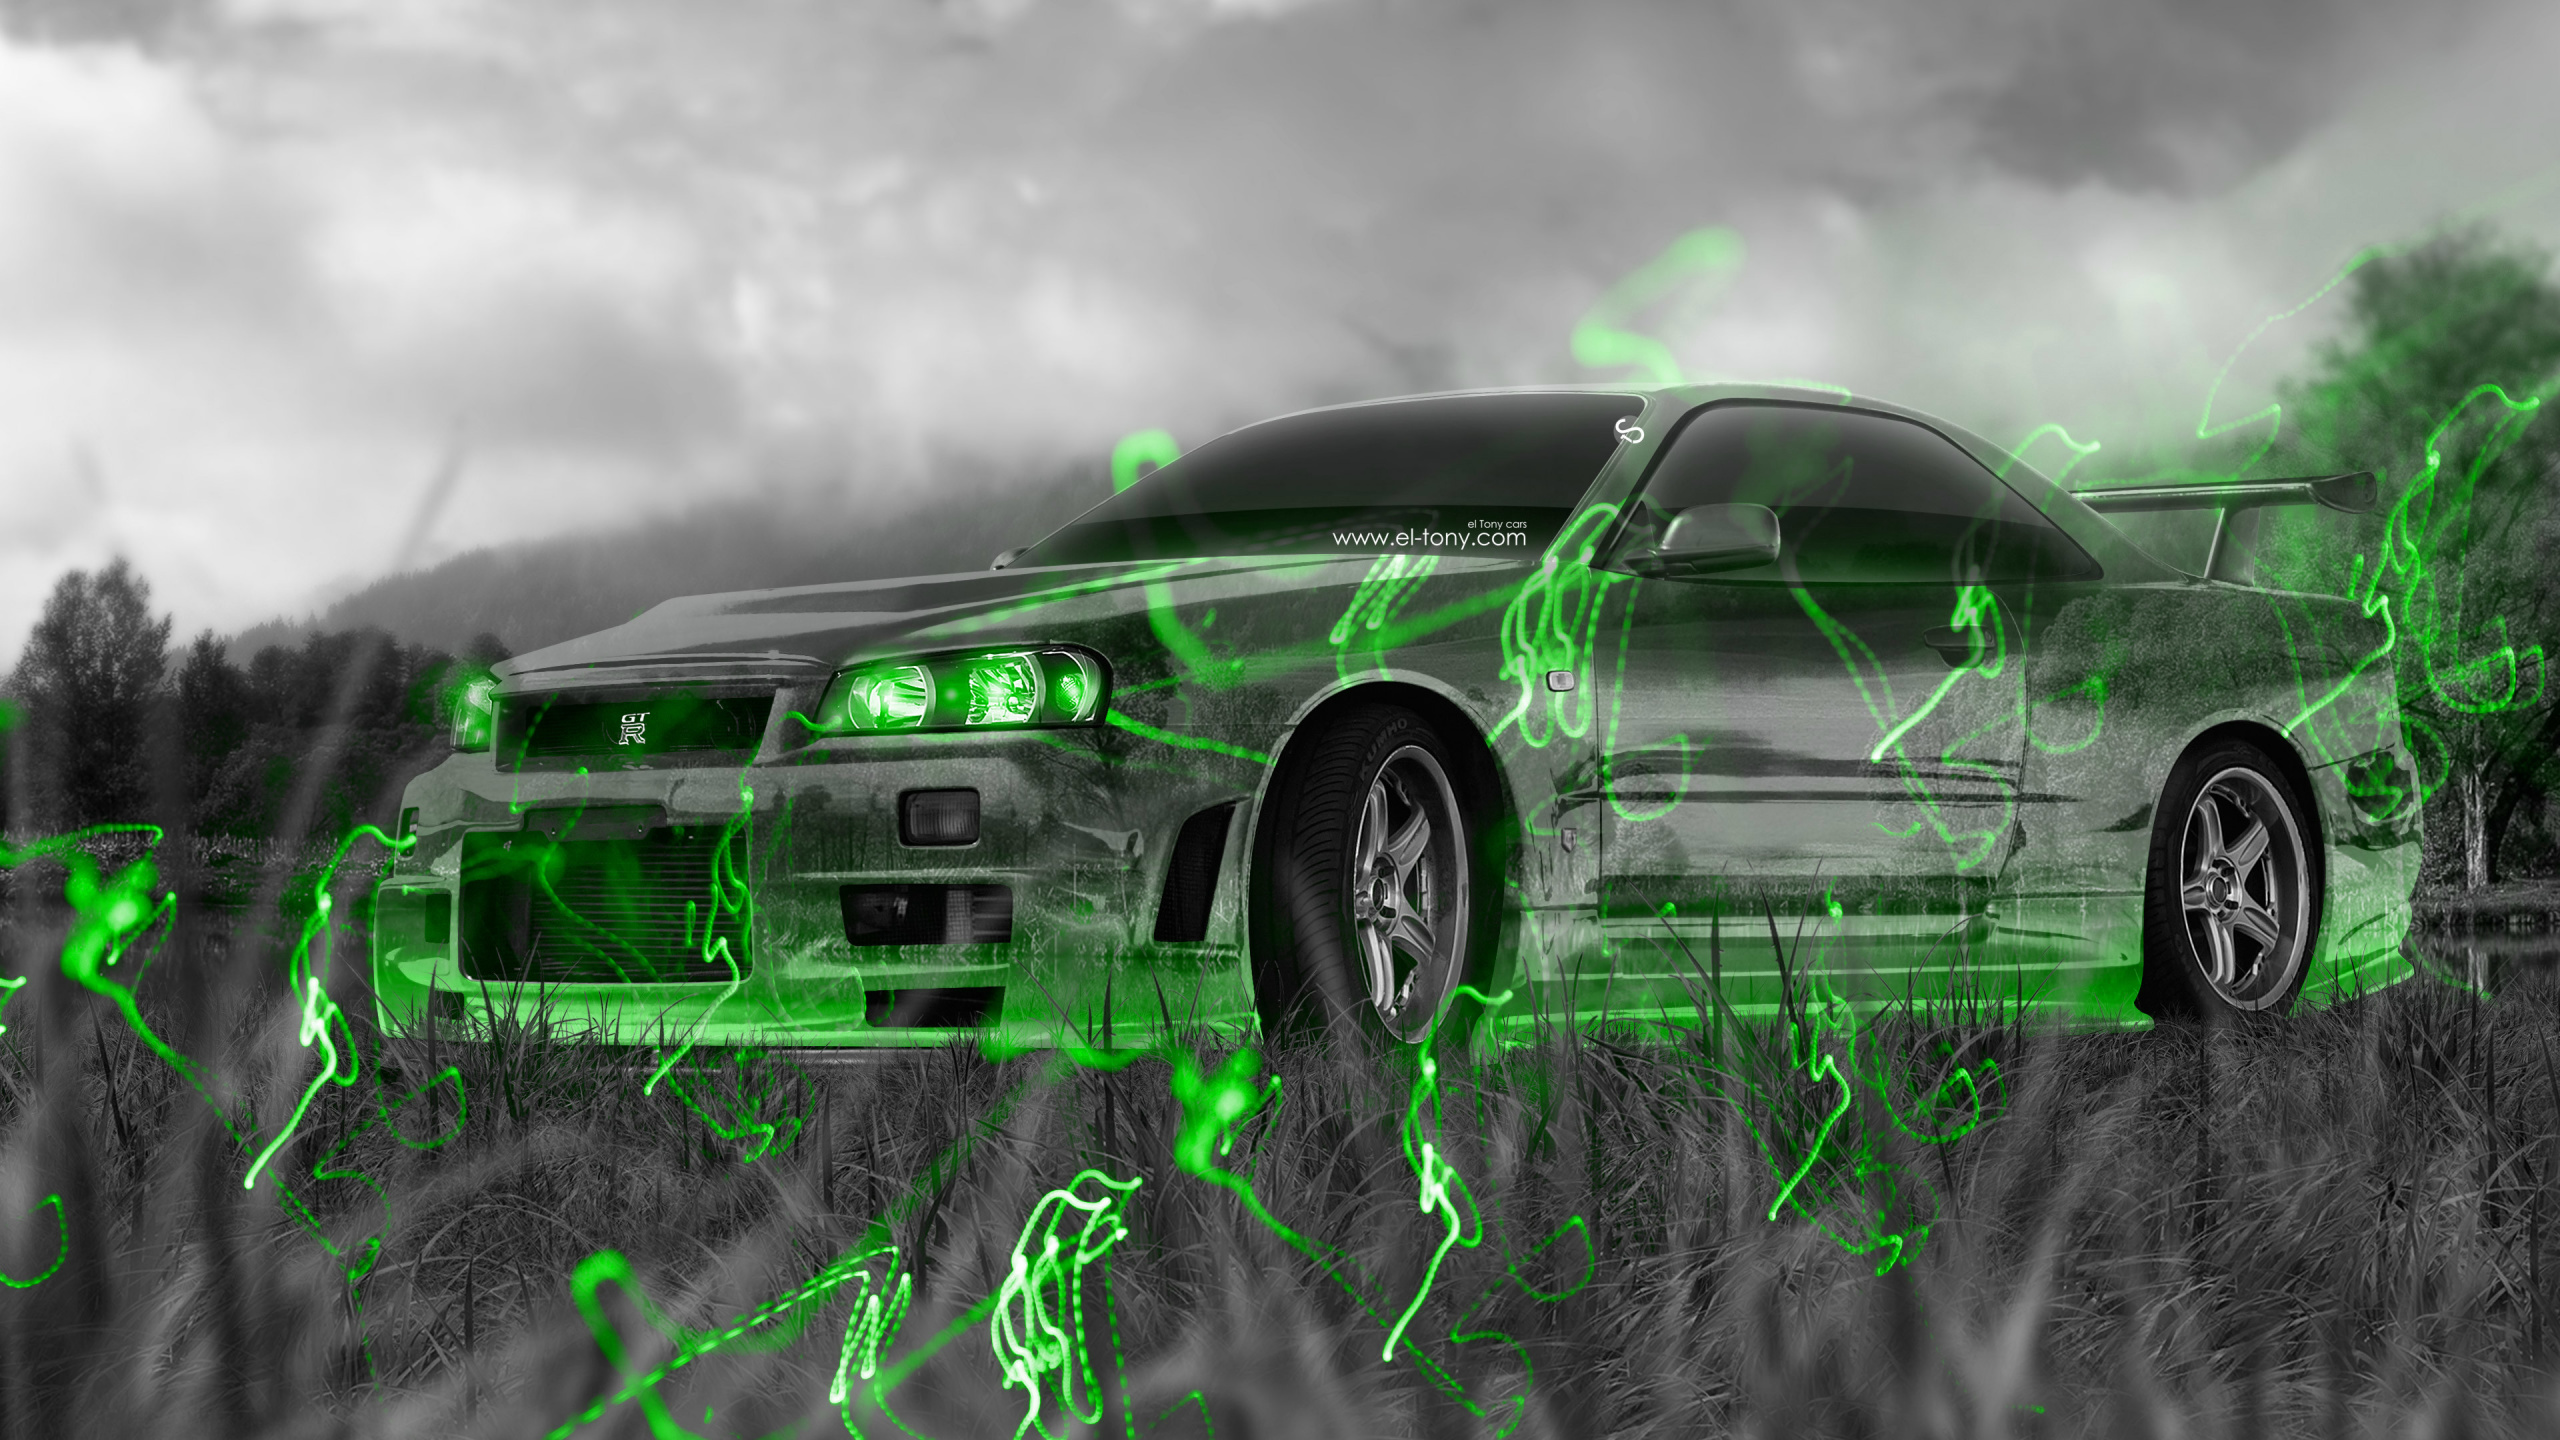 Black Bmw m 3 Coupe on Green Grass Field. Wallpaper in 2560x1440 Resolution